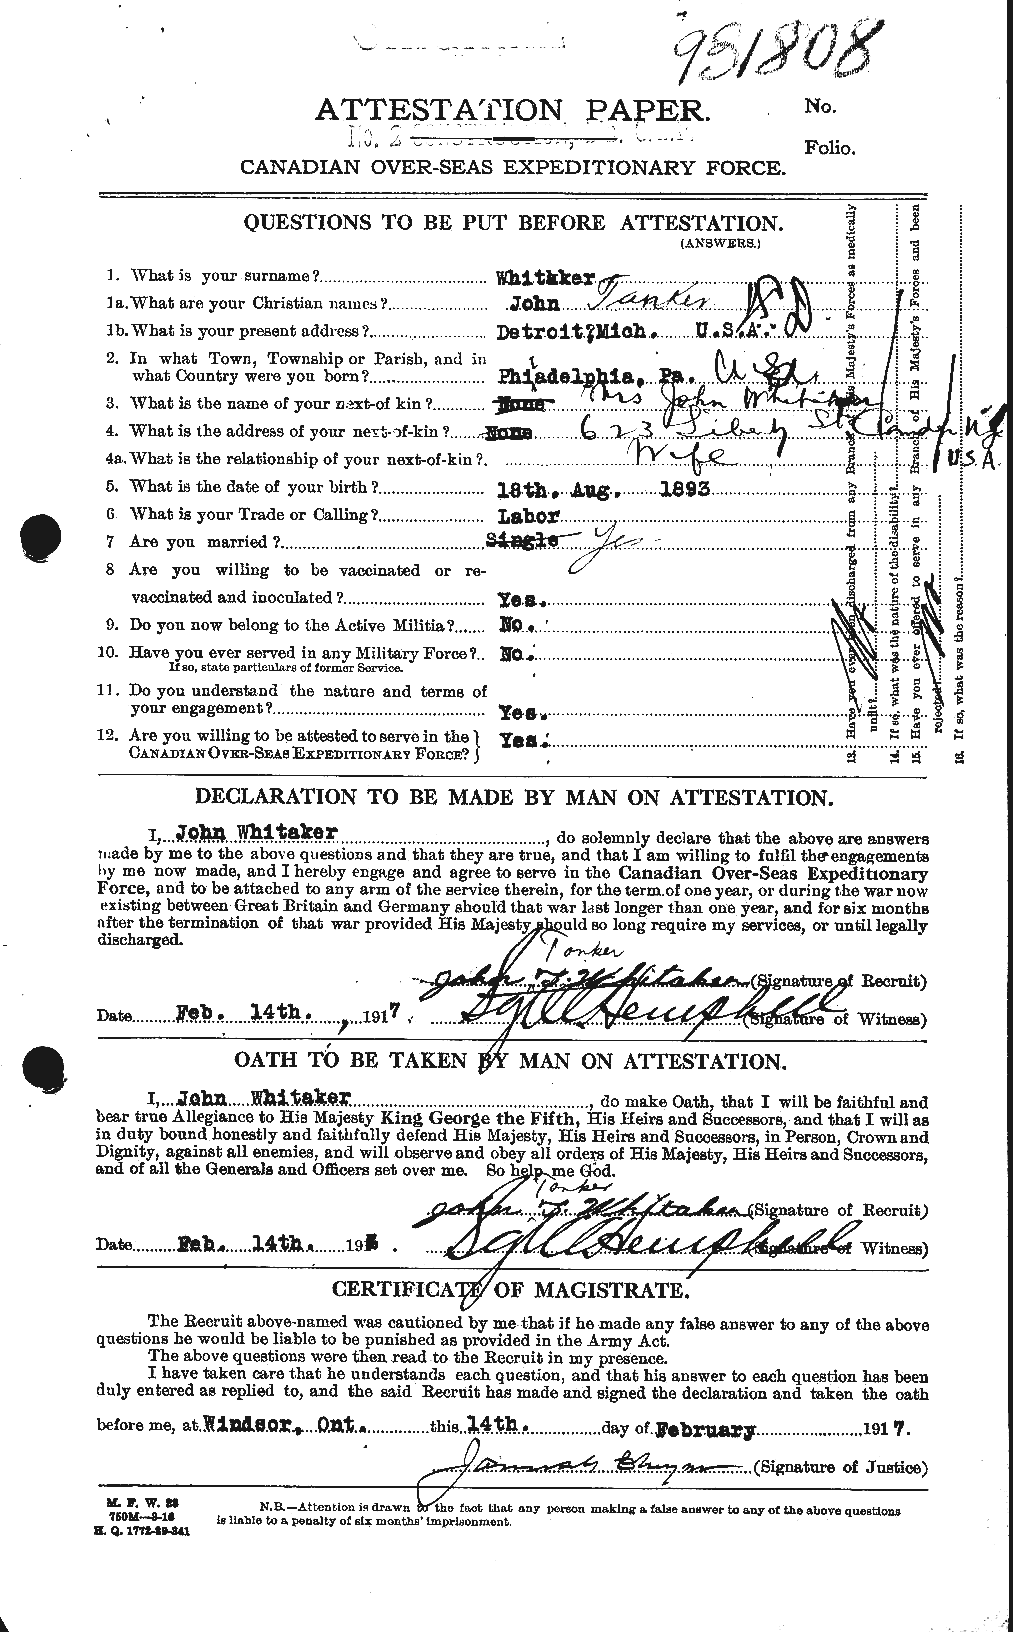 Personnel Records of the First World War - CEF 668834a